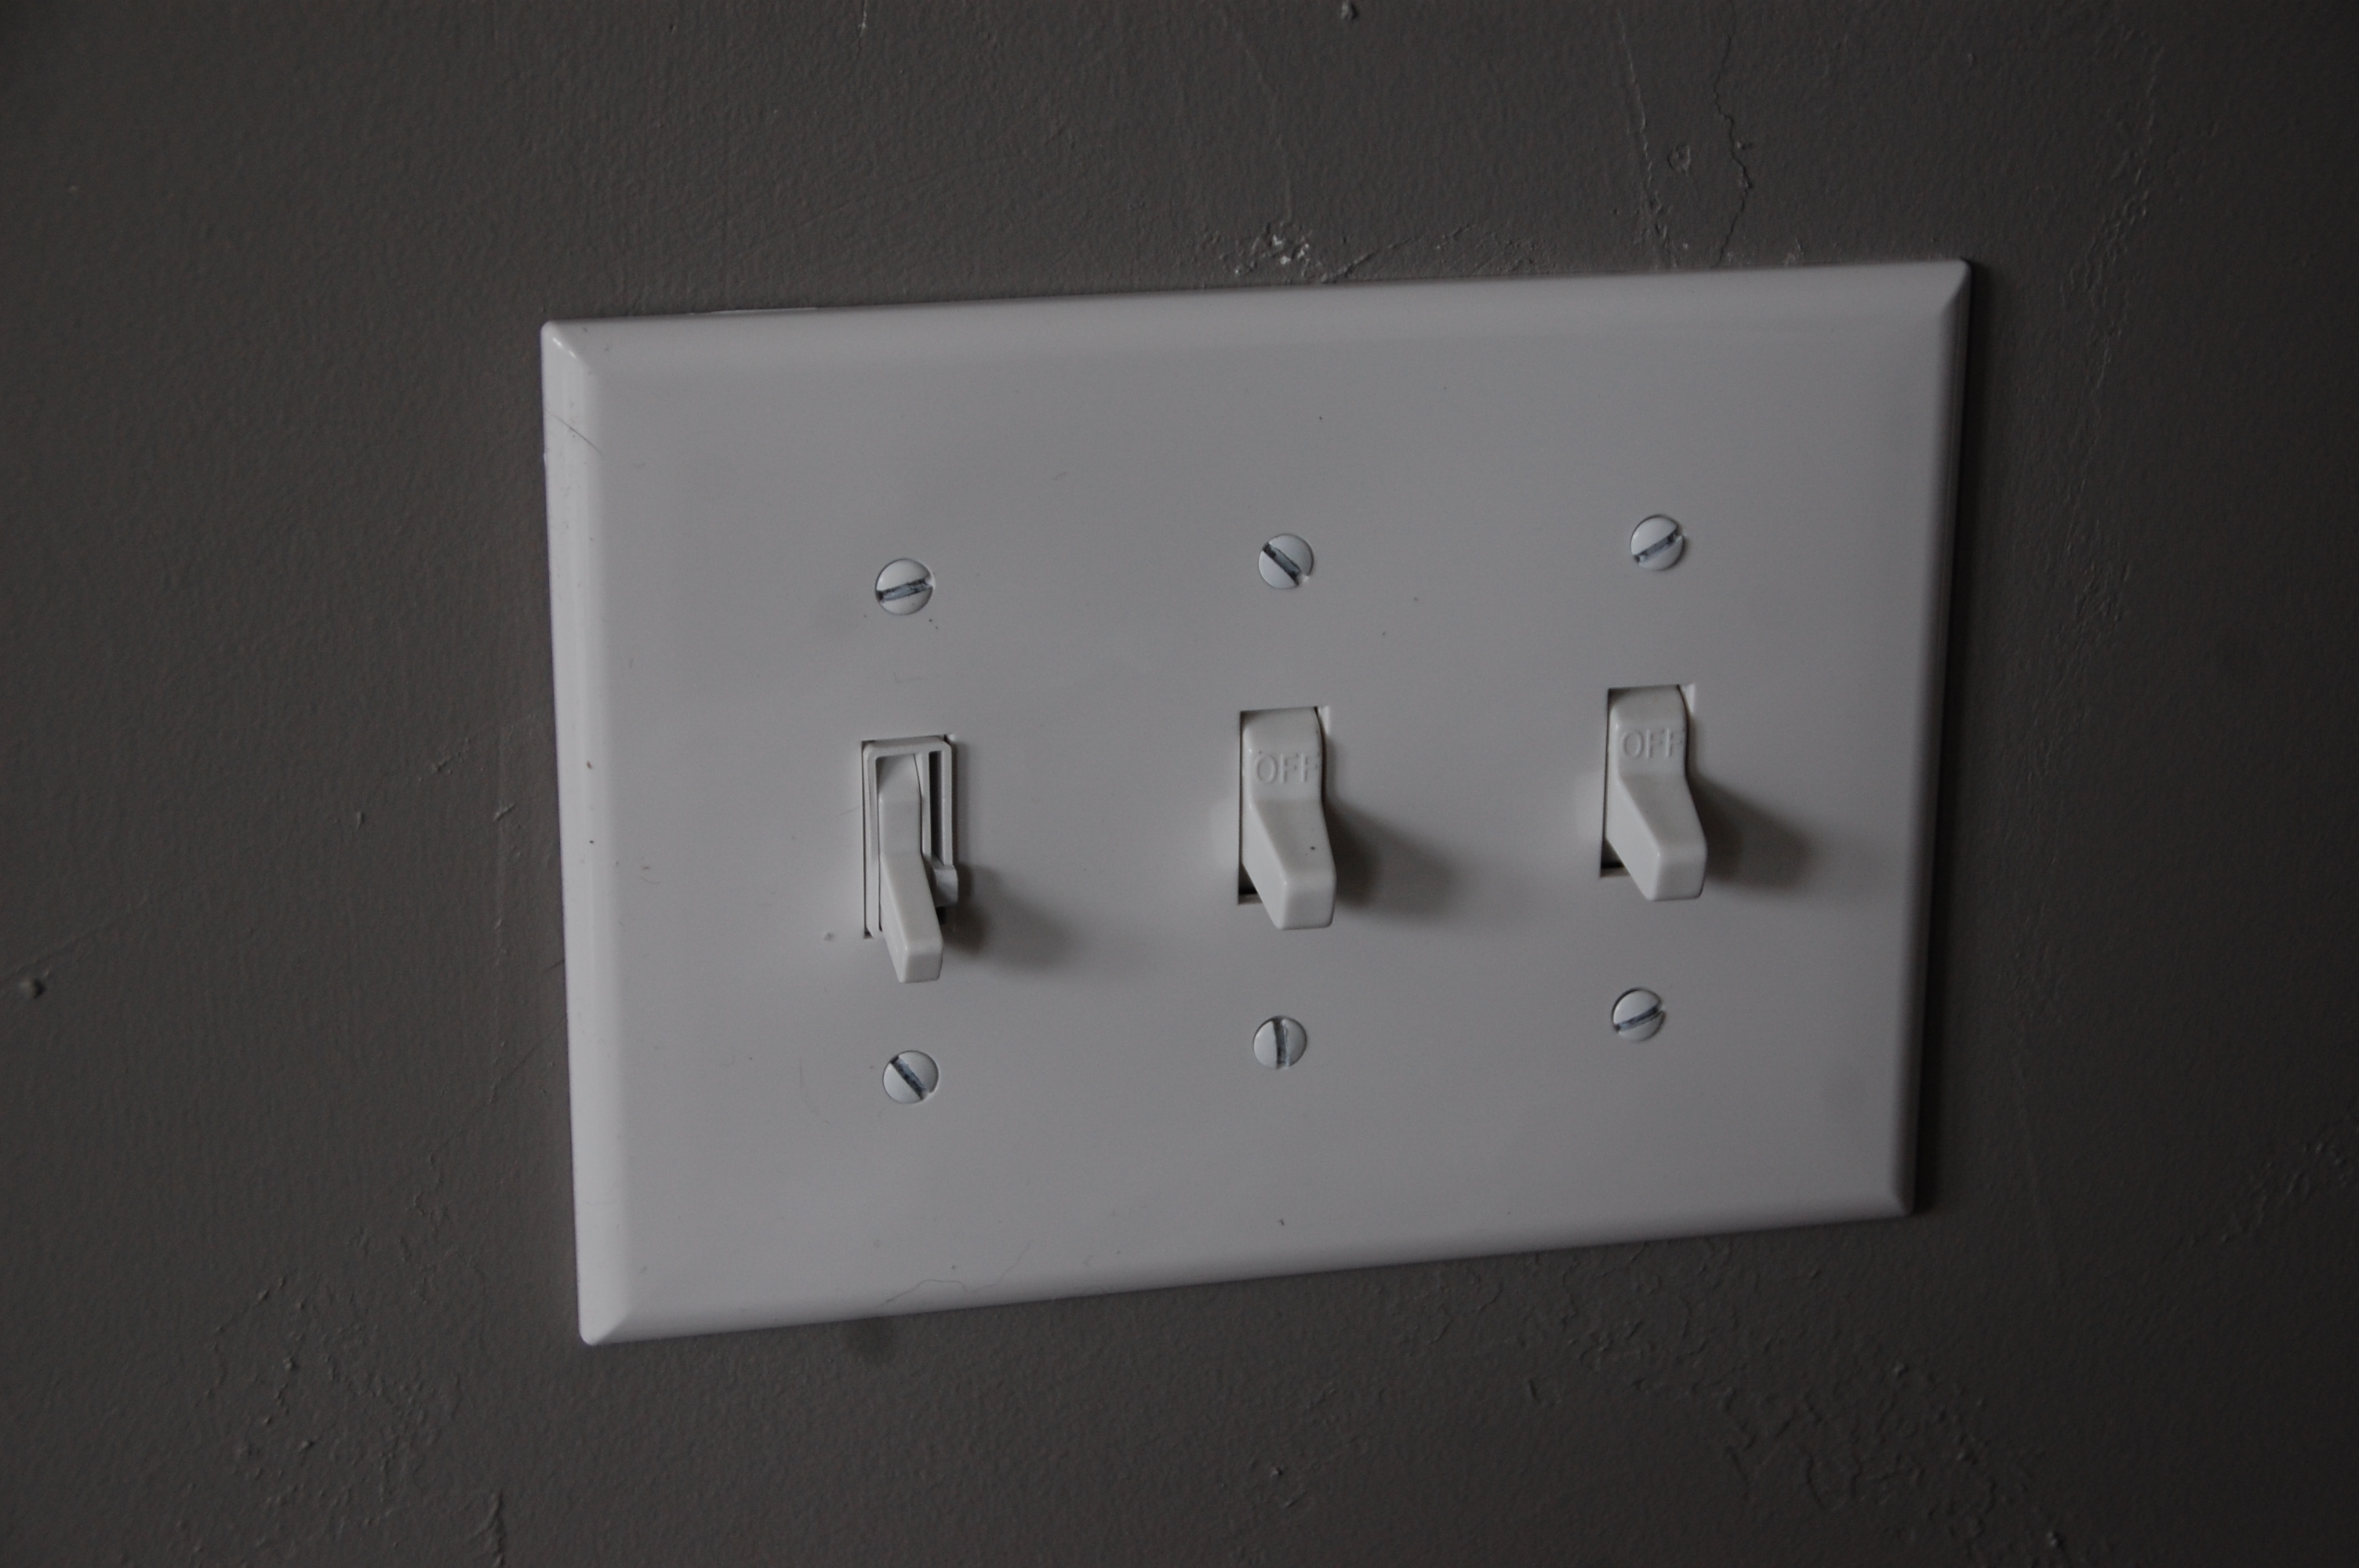 How to Install a Dimmer Switch - Complete